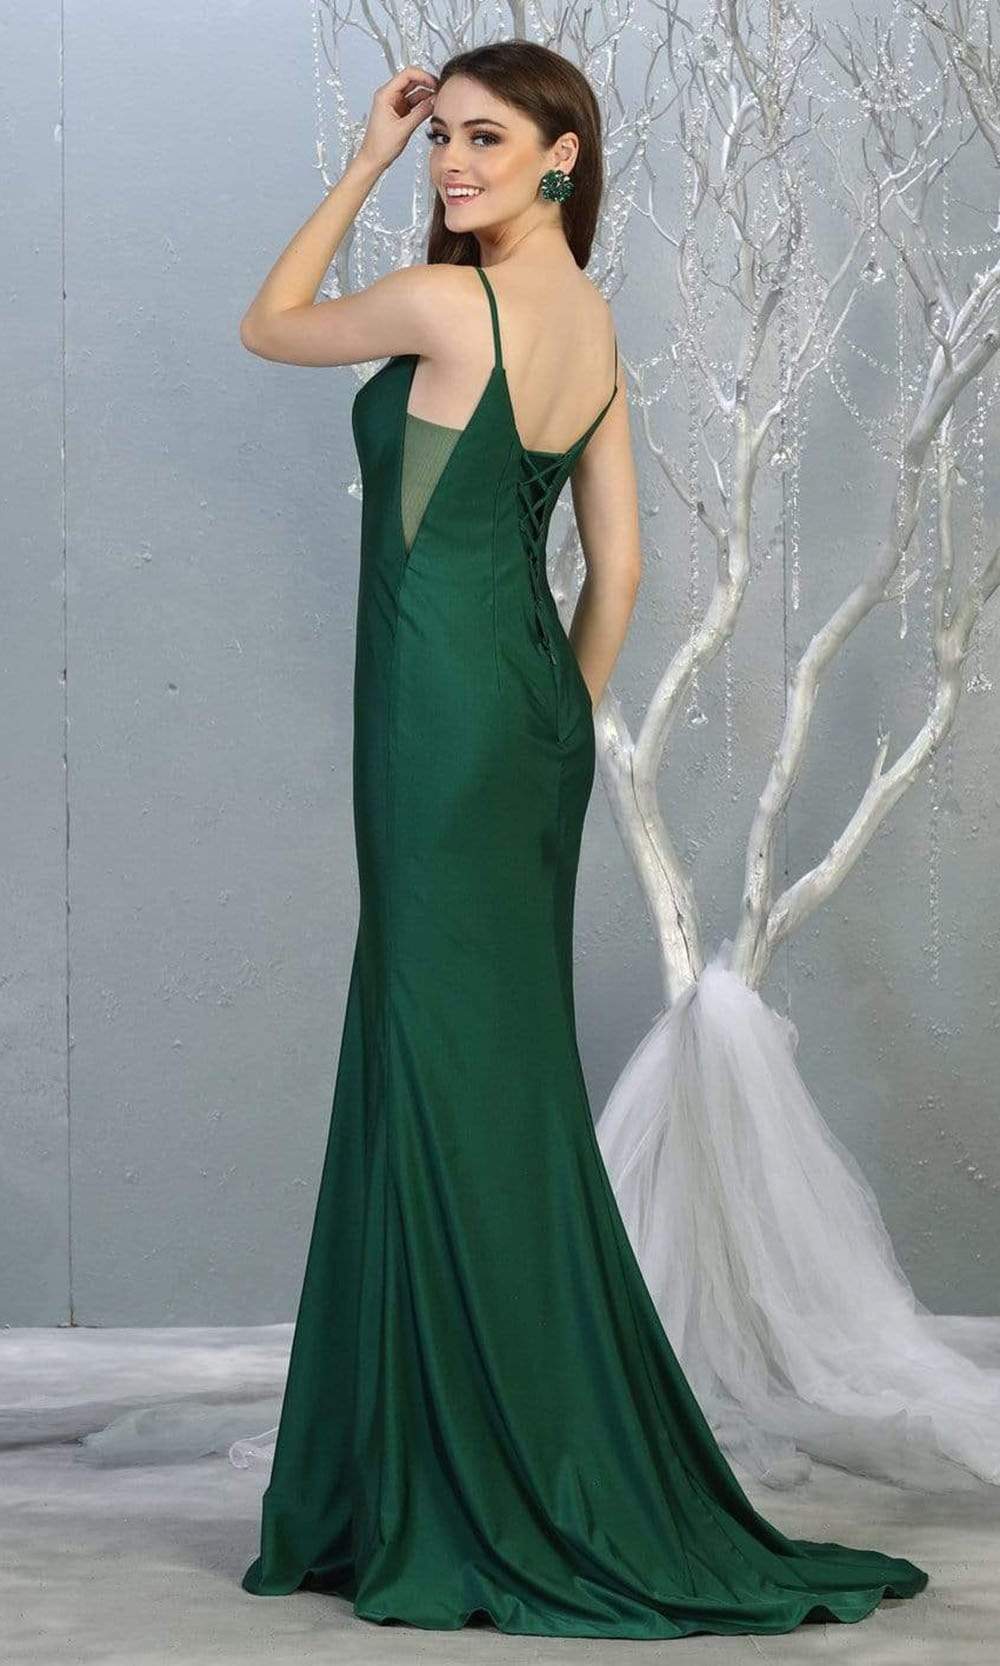 May Queen - MQ1819 Plunging V-neck Sheath Dress With Train Prom Dresses